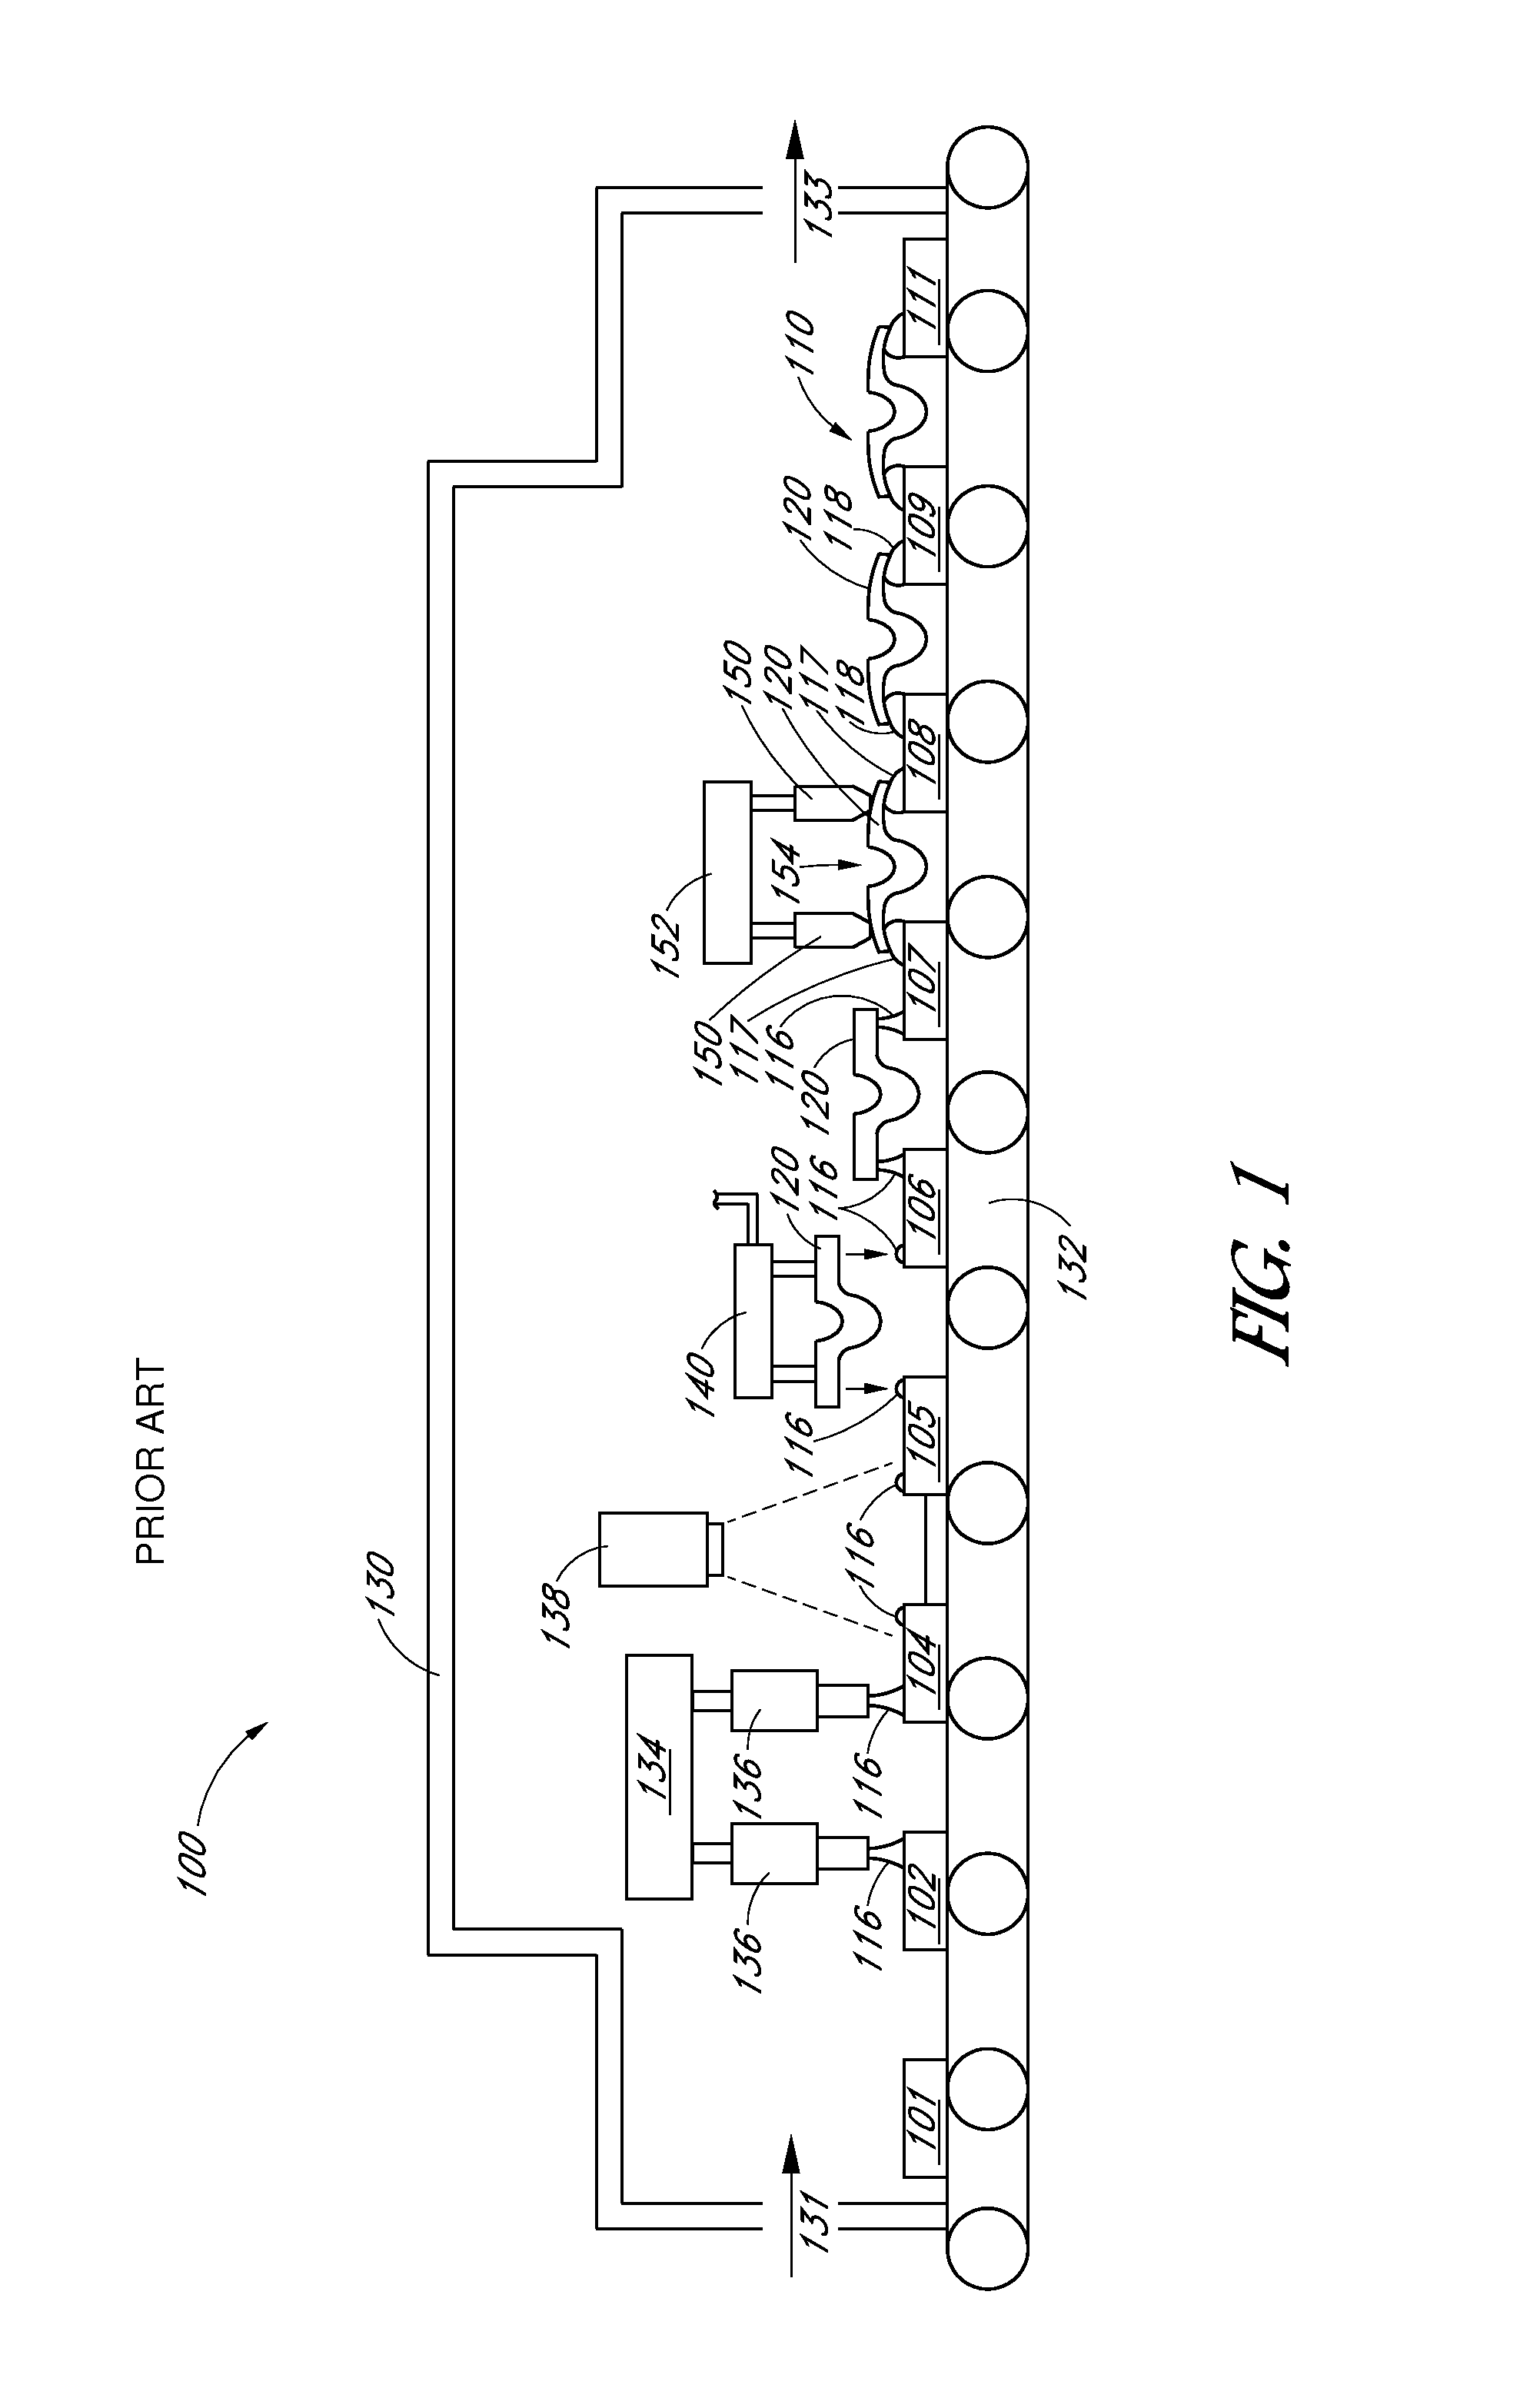 Methods and structures for forming and improving solder joint thickness and planarity control features for solar cells